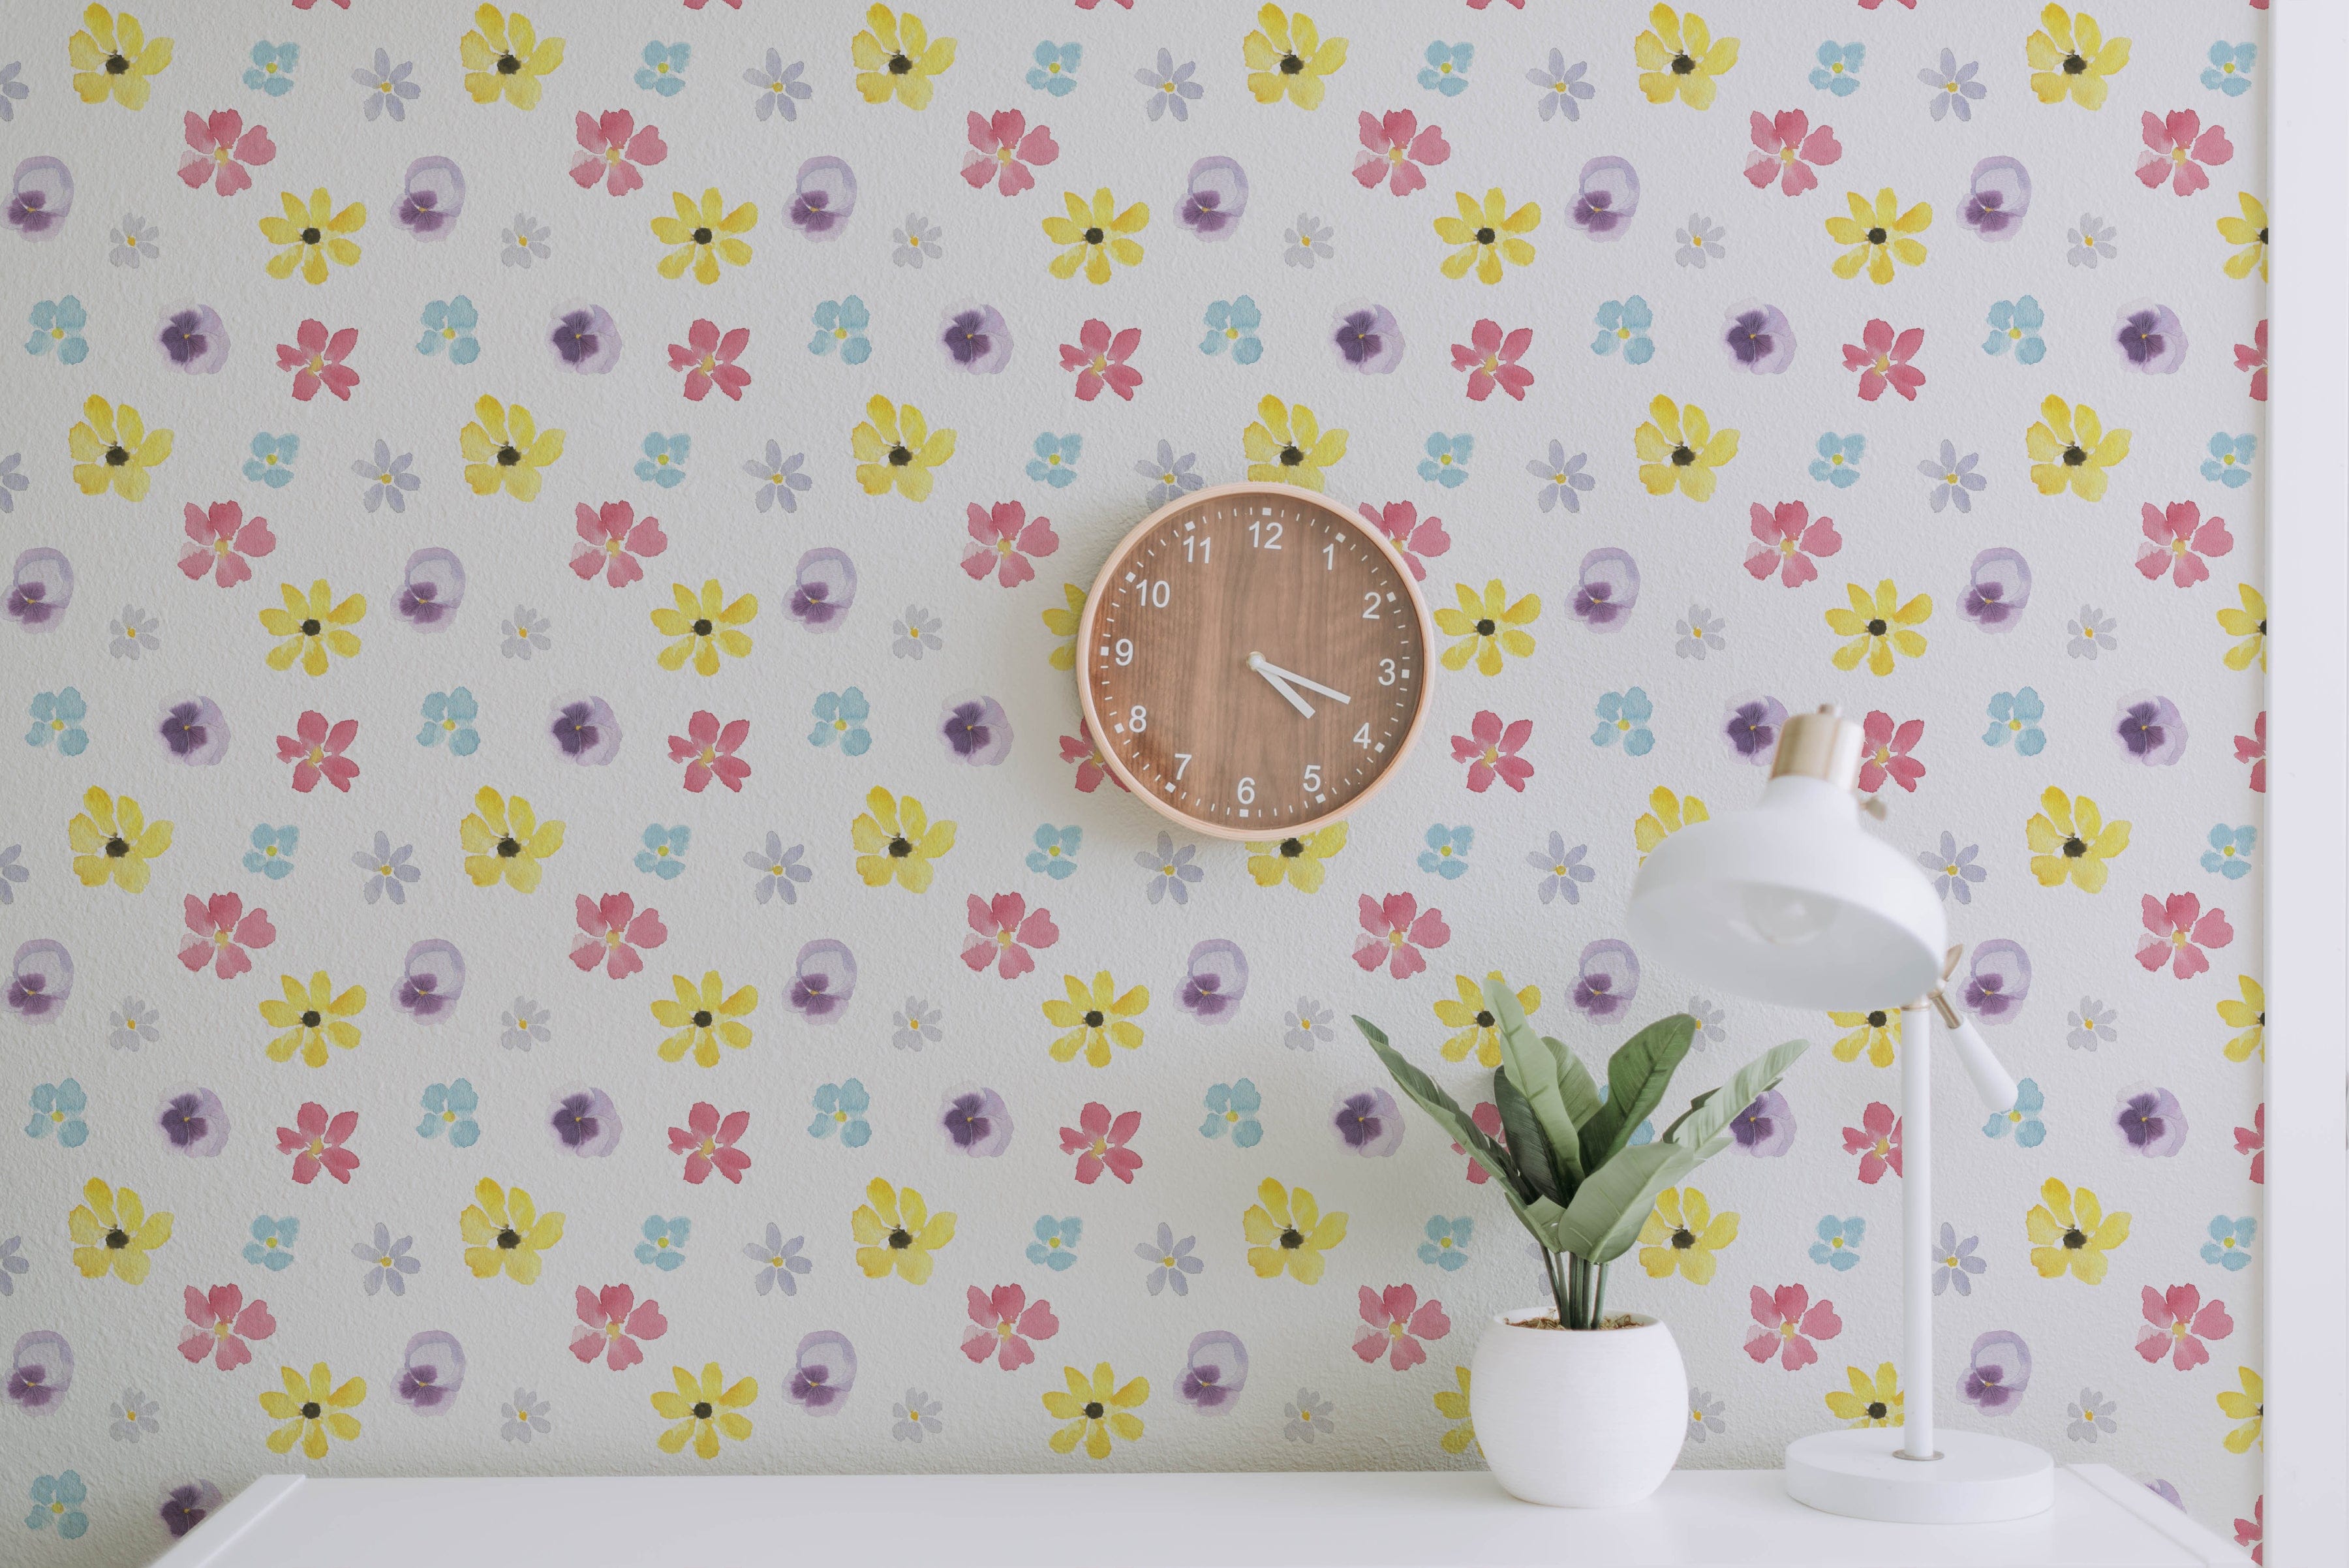 A workspace adorned with the Spring Field Wallpaper - VI, highlighting its lively floral pattern in bright yellow, pink, purple, and blue hues. The space includes a wooden wall clock and a white desk lamp beside a small plant.